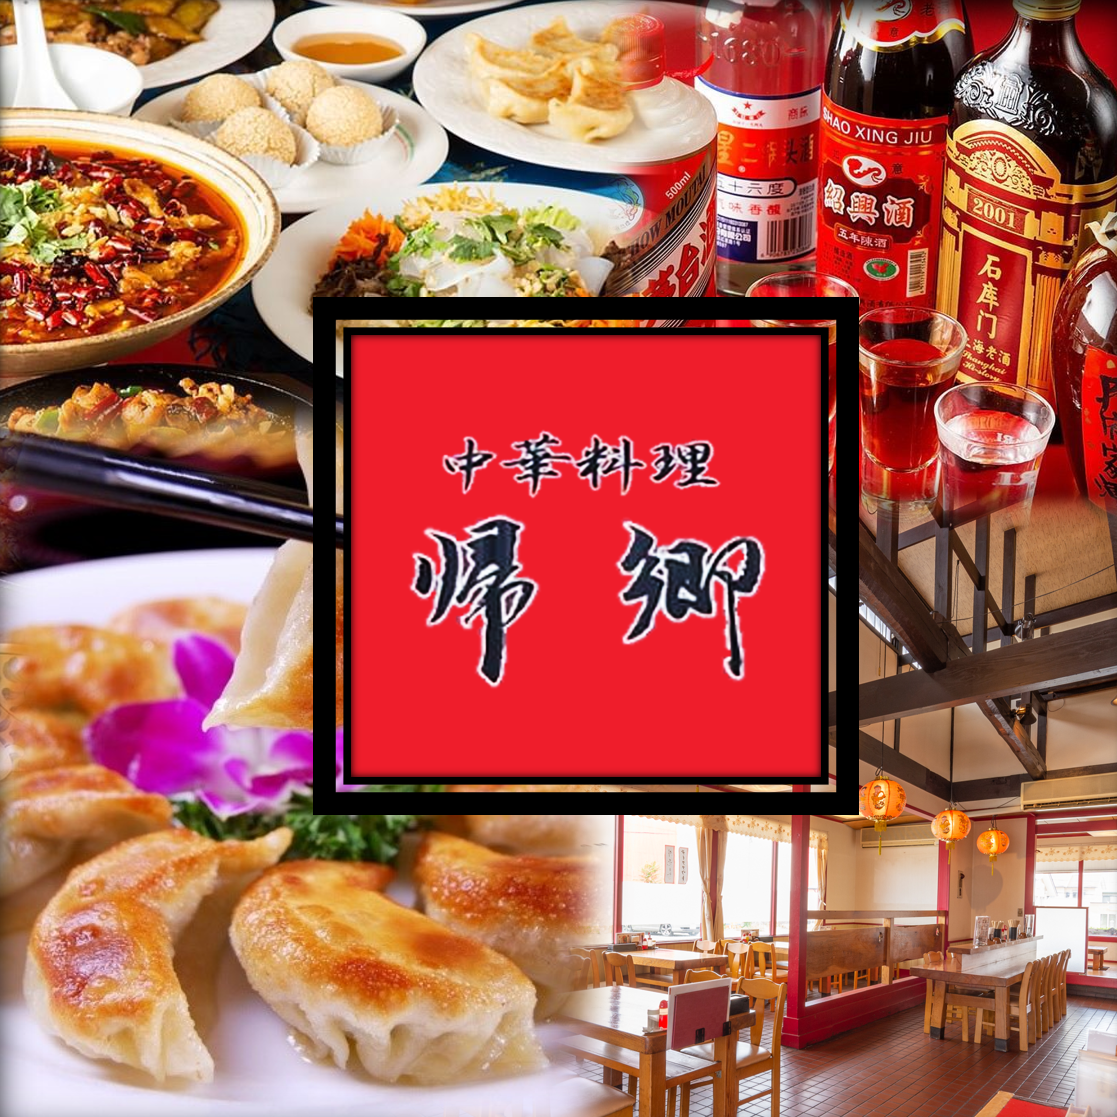 A restaurant where you can enjoy authentic Chinese cuisine